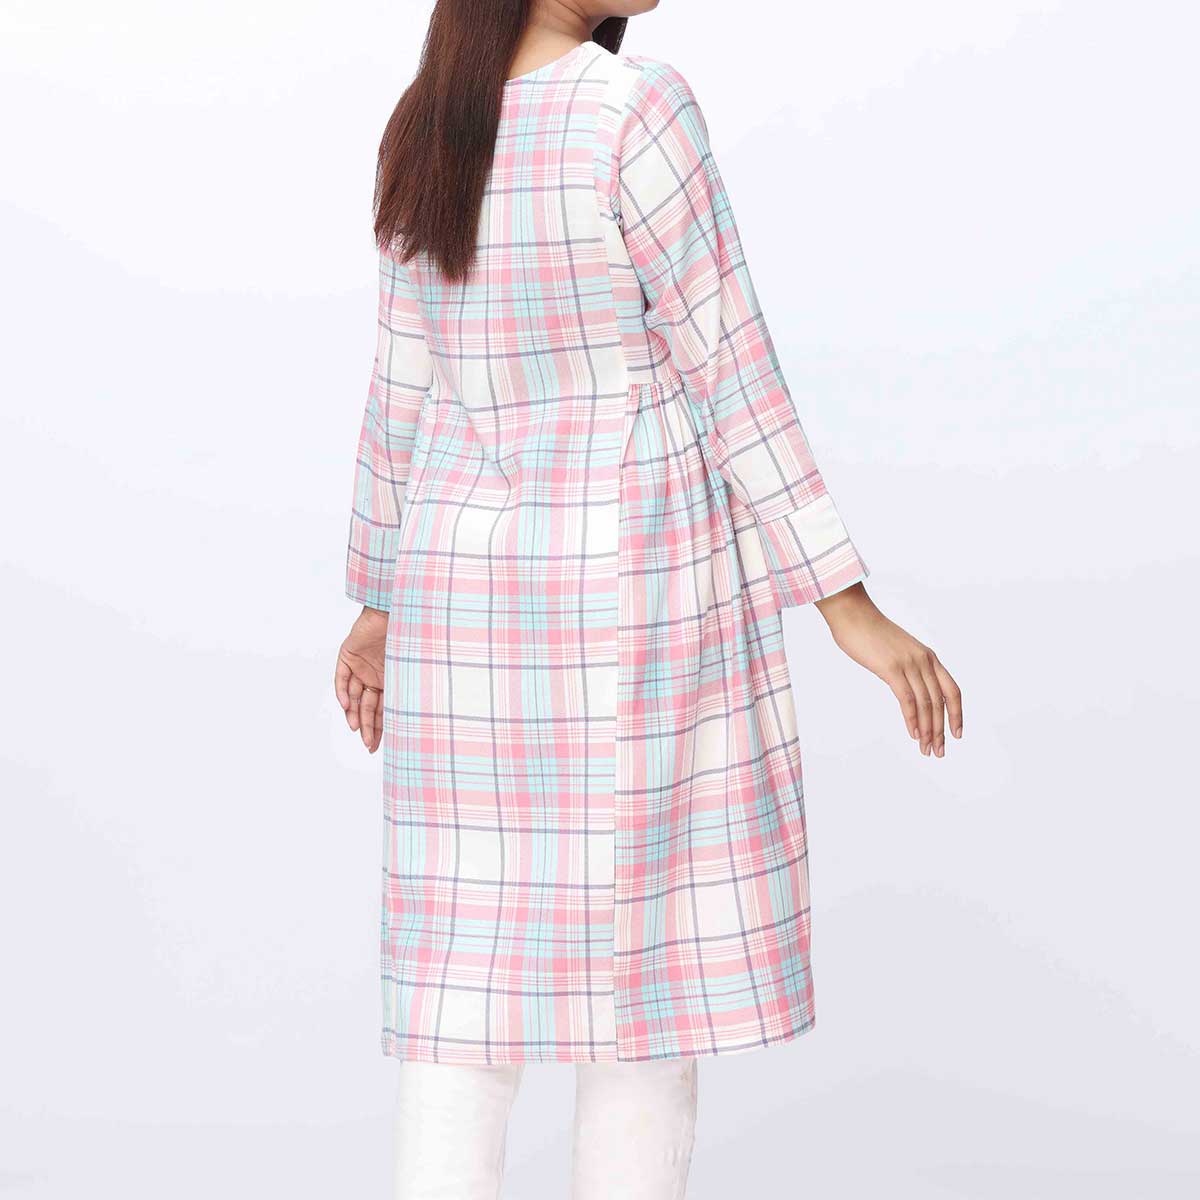 1PC- Flannel Checkered Shirt PW3206